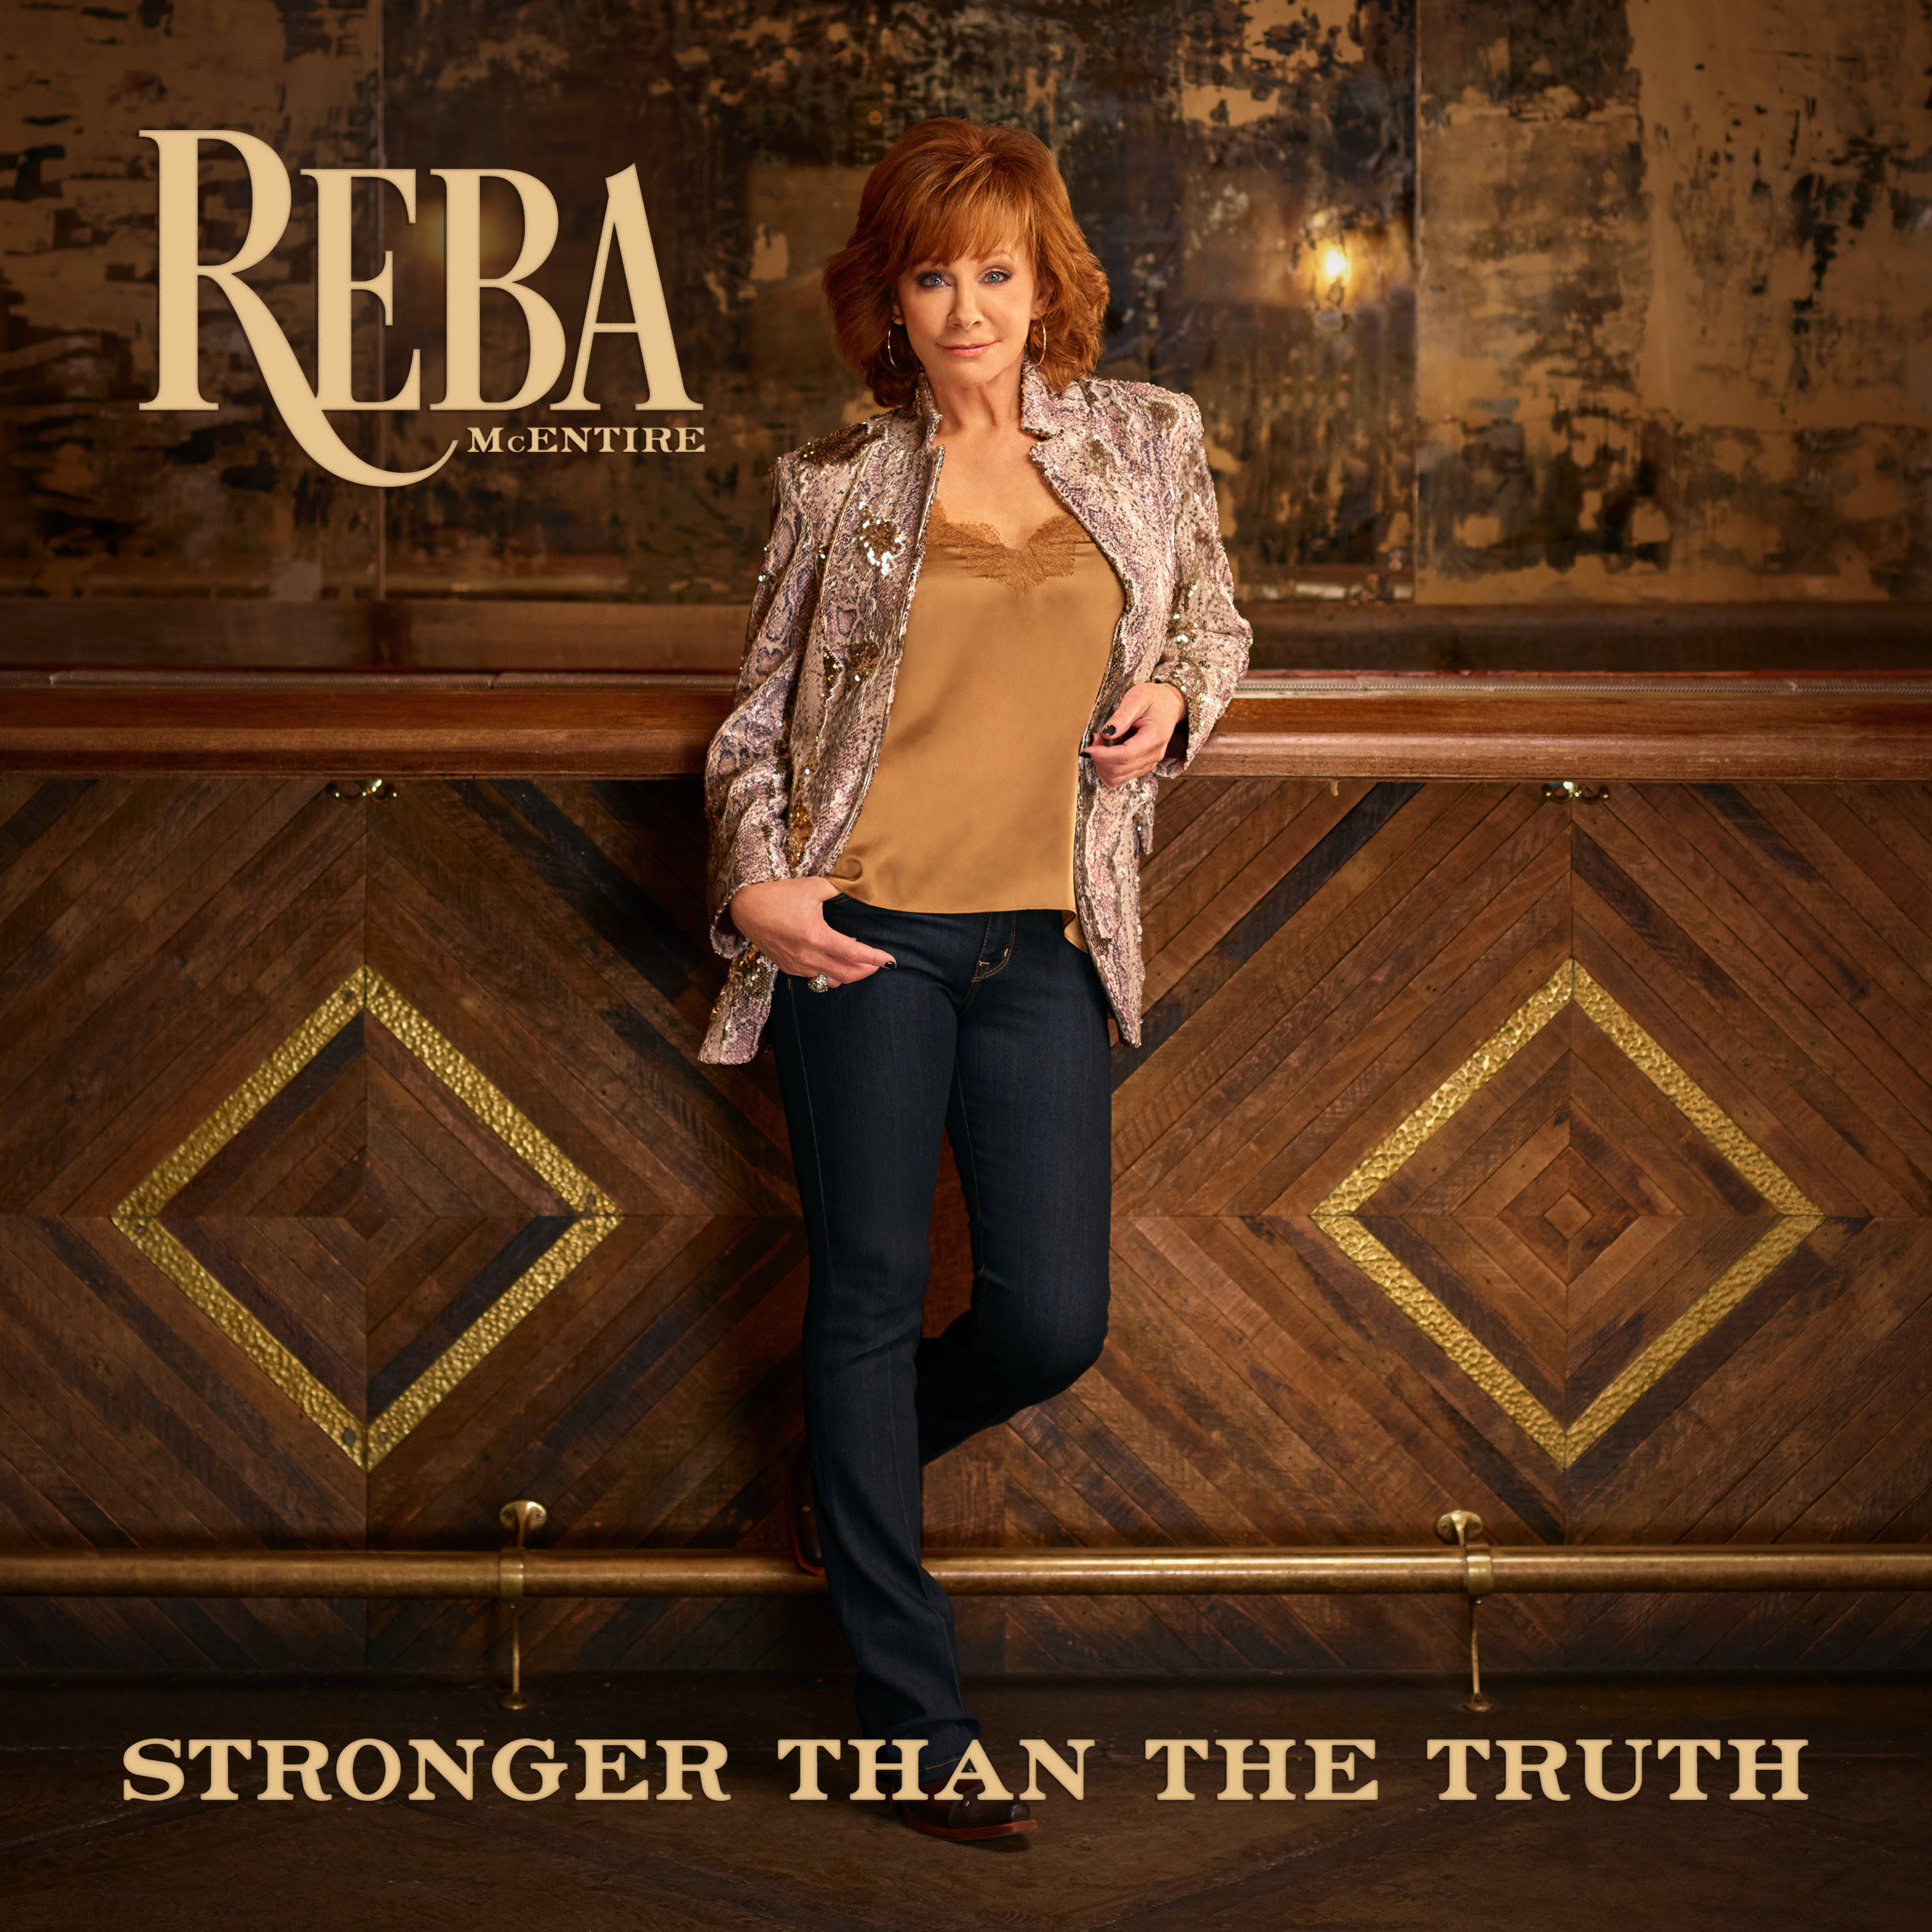 Reba McEntire to Release New Album ‘Stronger Than The Truth’ Ahead of 54th ACM Awards